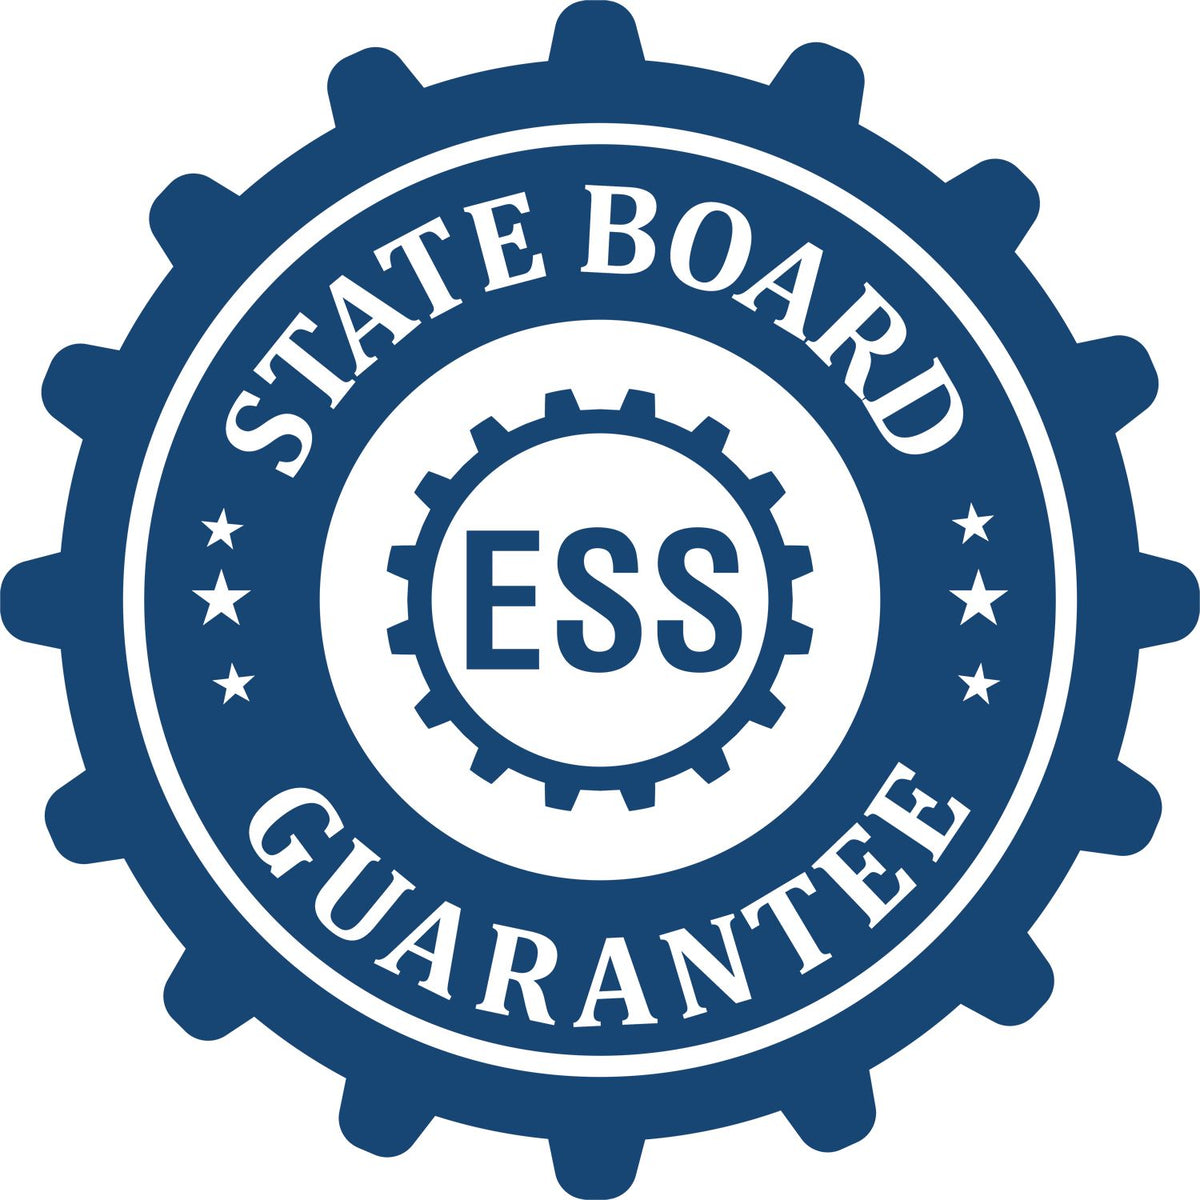 An emblem in a gear shape illustrating a state board guarantee for the Handheld Wisconsin Professional Geologist Embosser